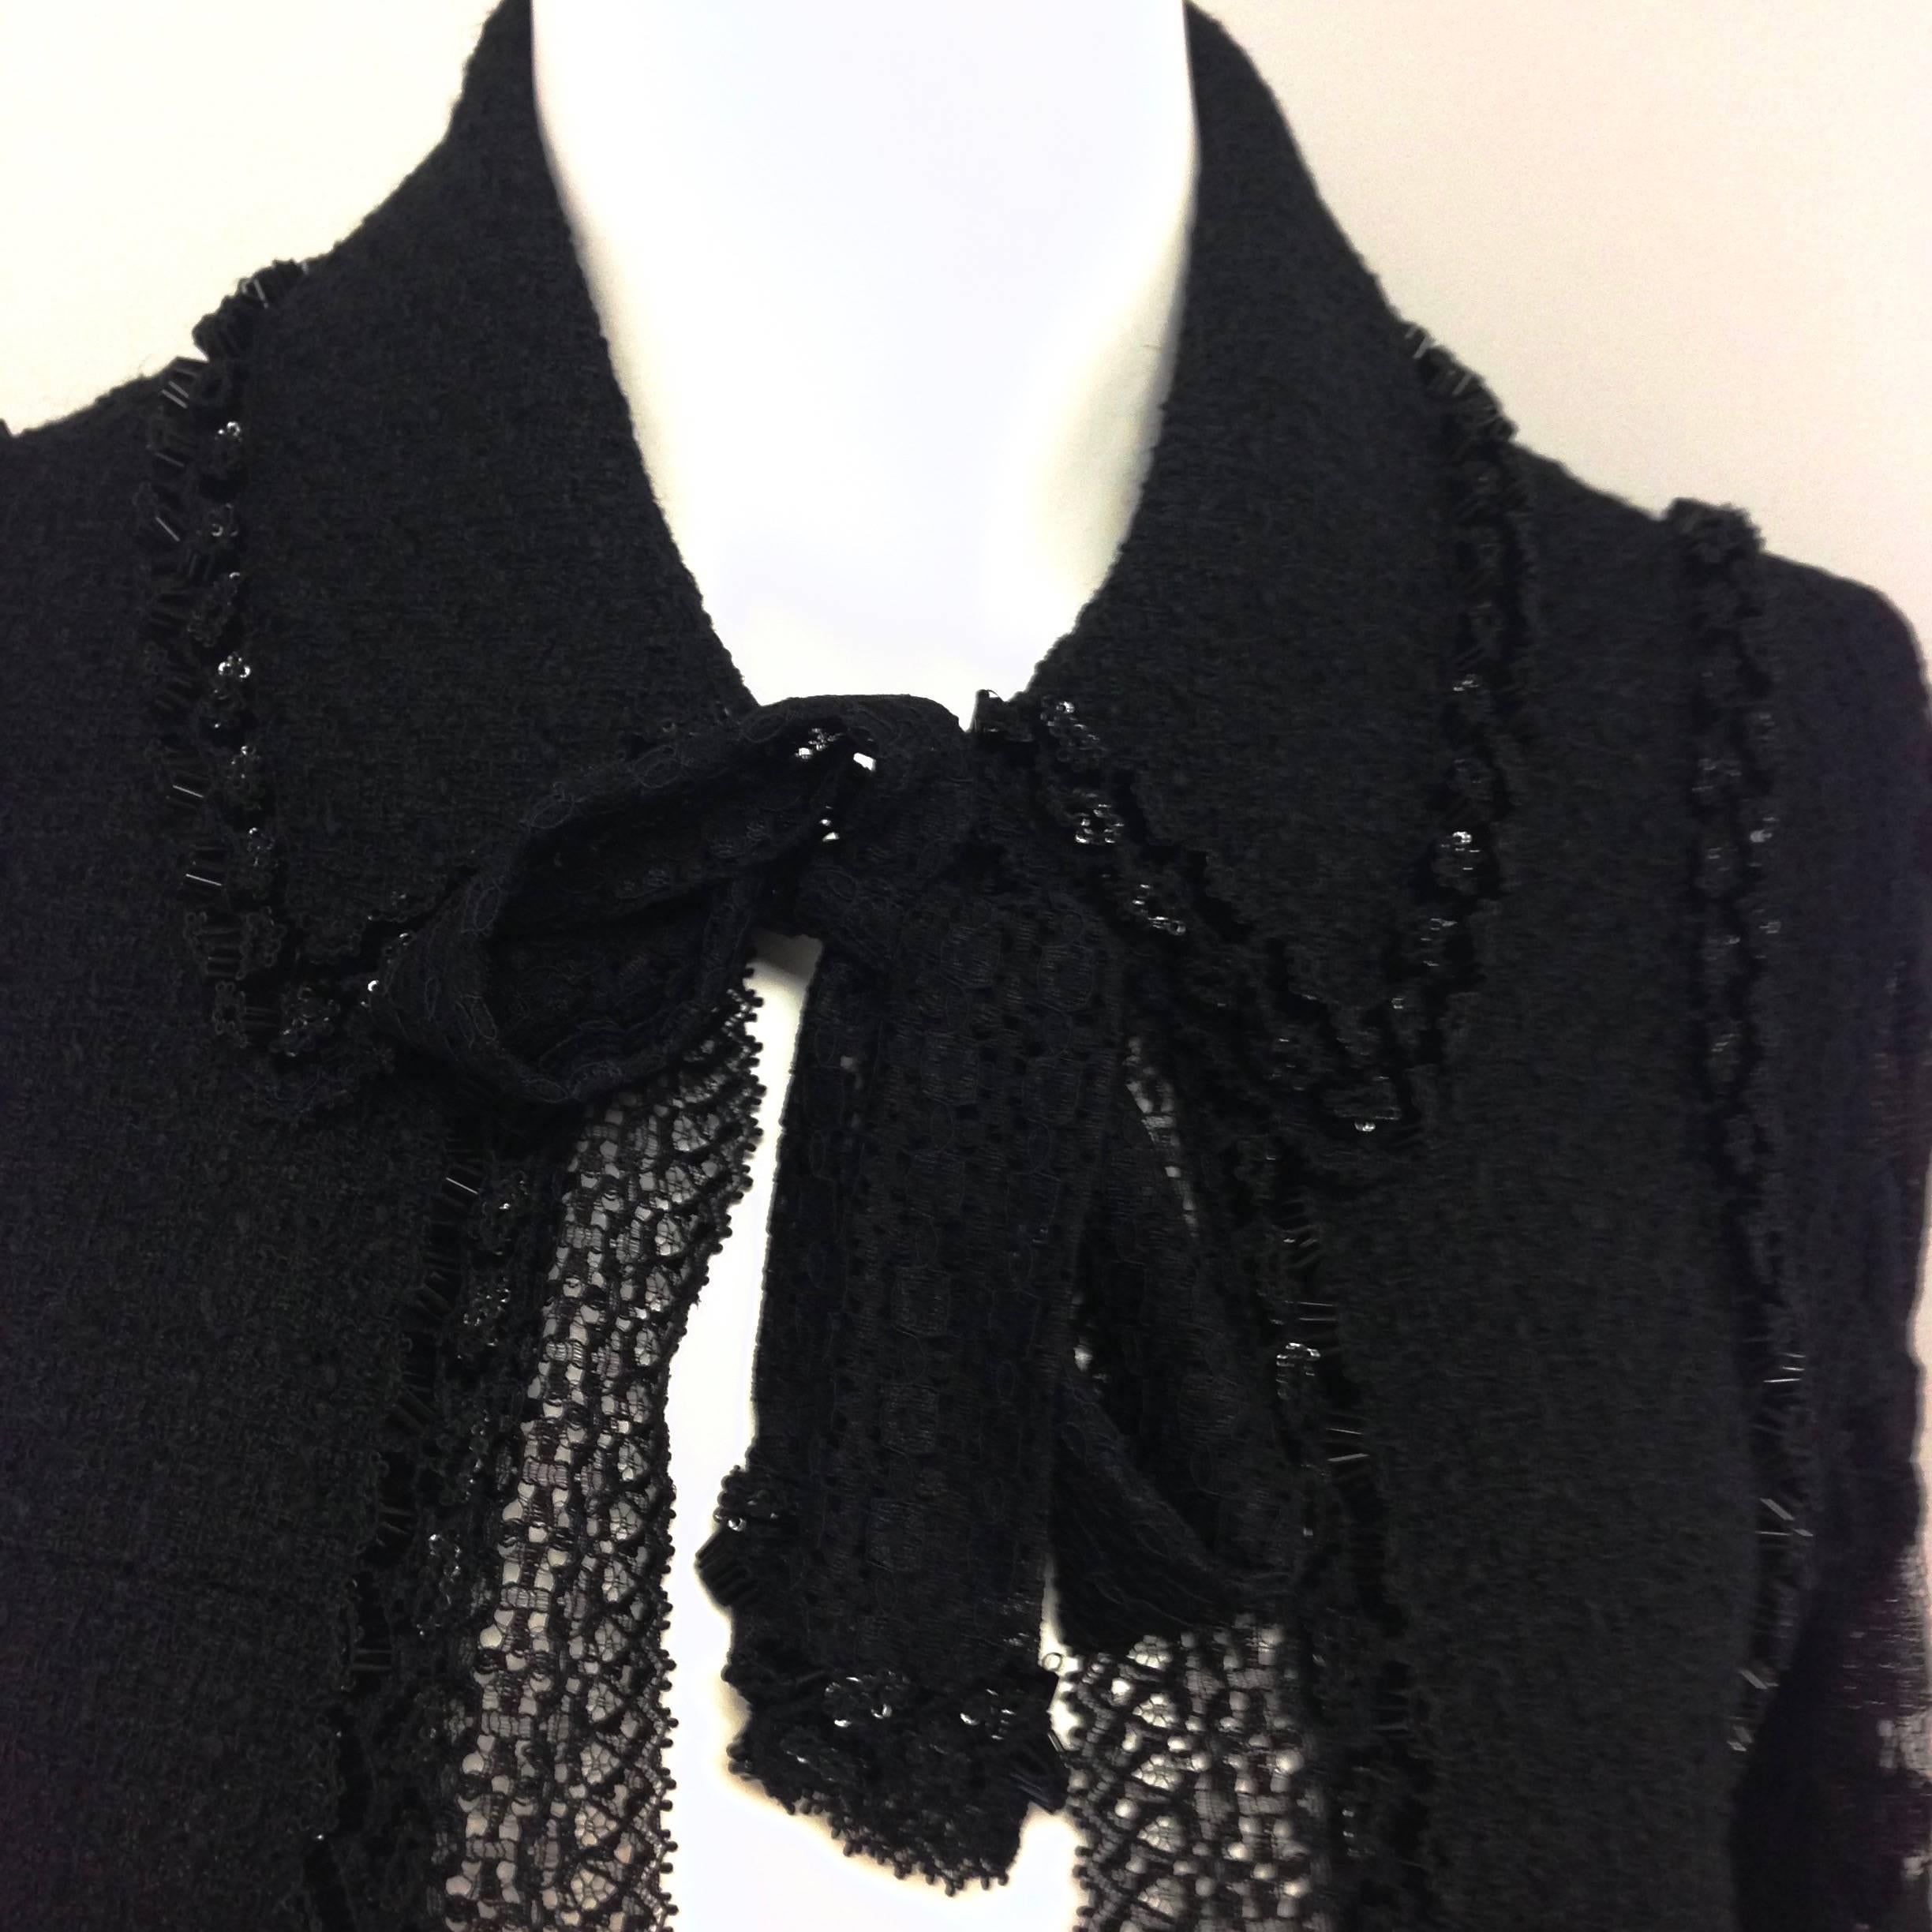 Authentic Chanel black tweed and lace beaded jacket. Features black beading detail, black lace full-length sleeves, two front pockets with button closures, and a tie detail at the neck. Composition: 99% wool, 1% nylon. Made in France.
Size: 38 